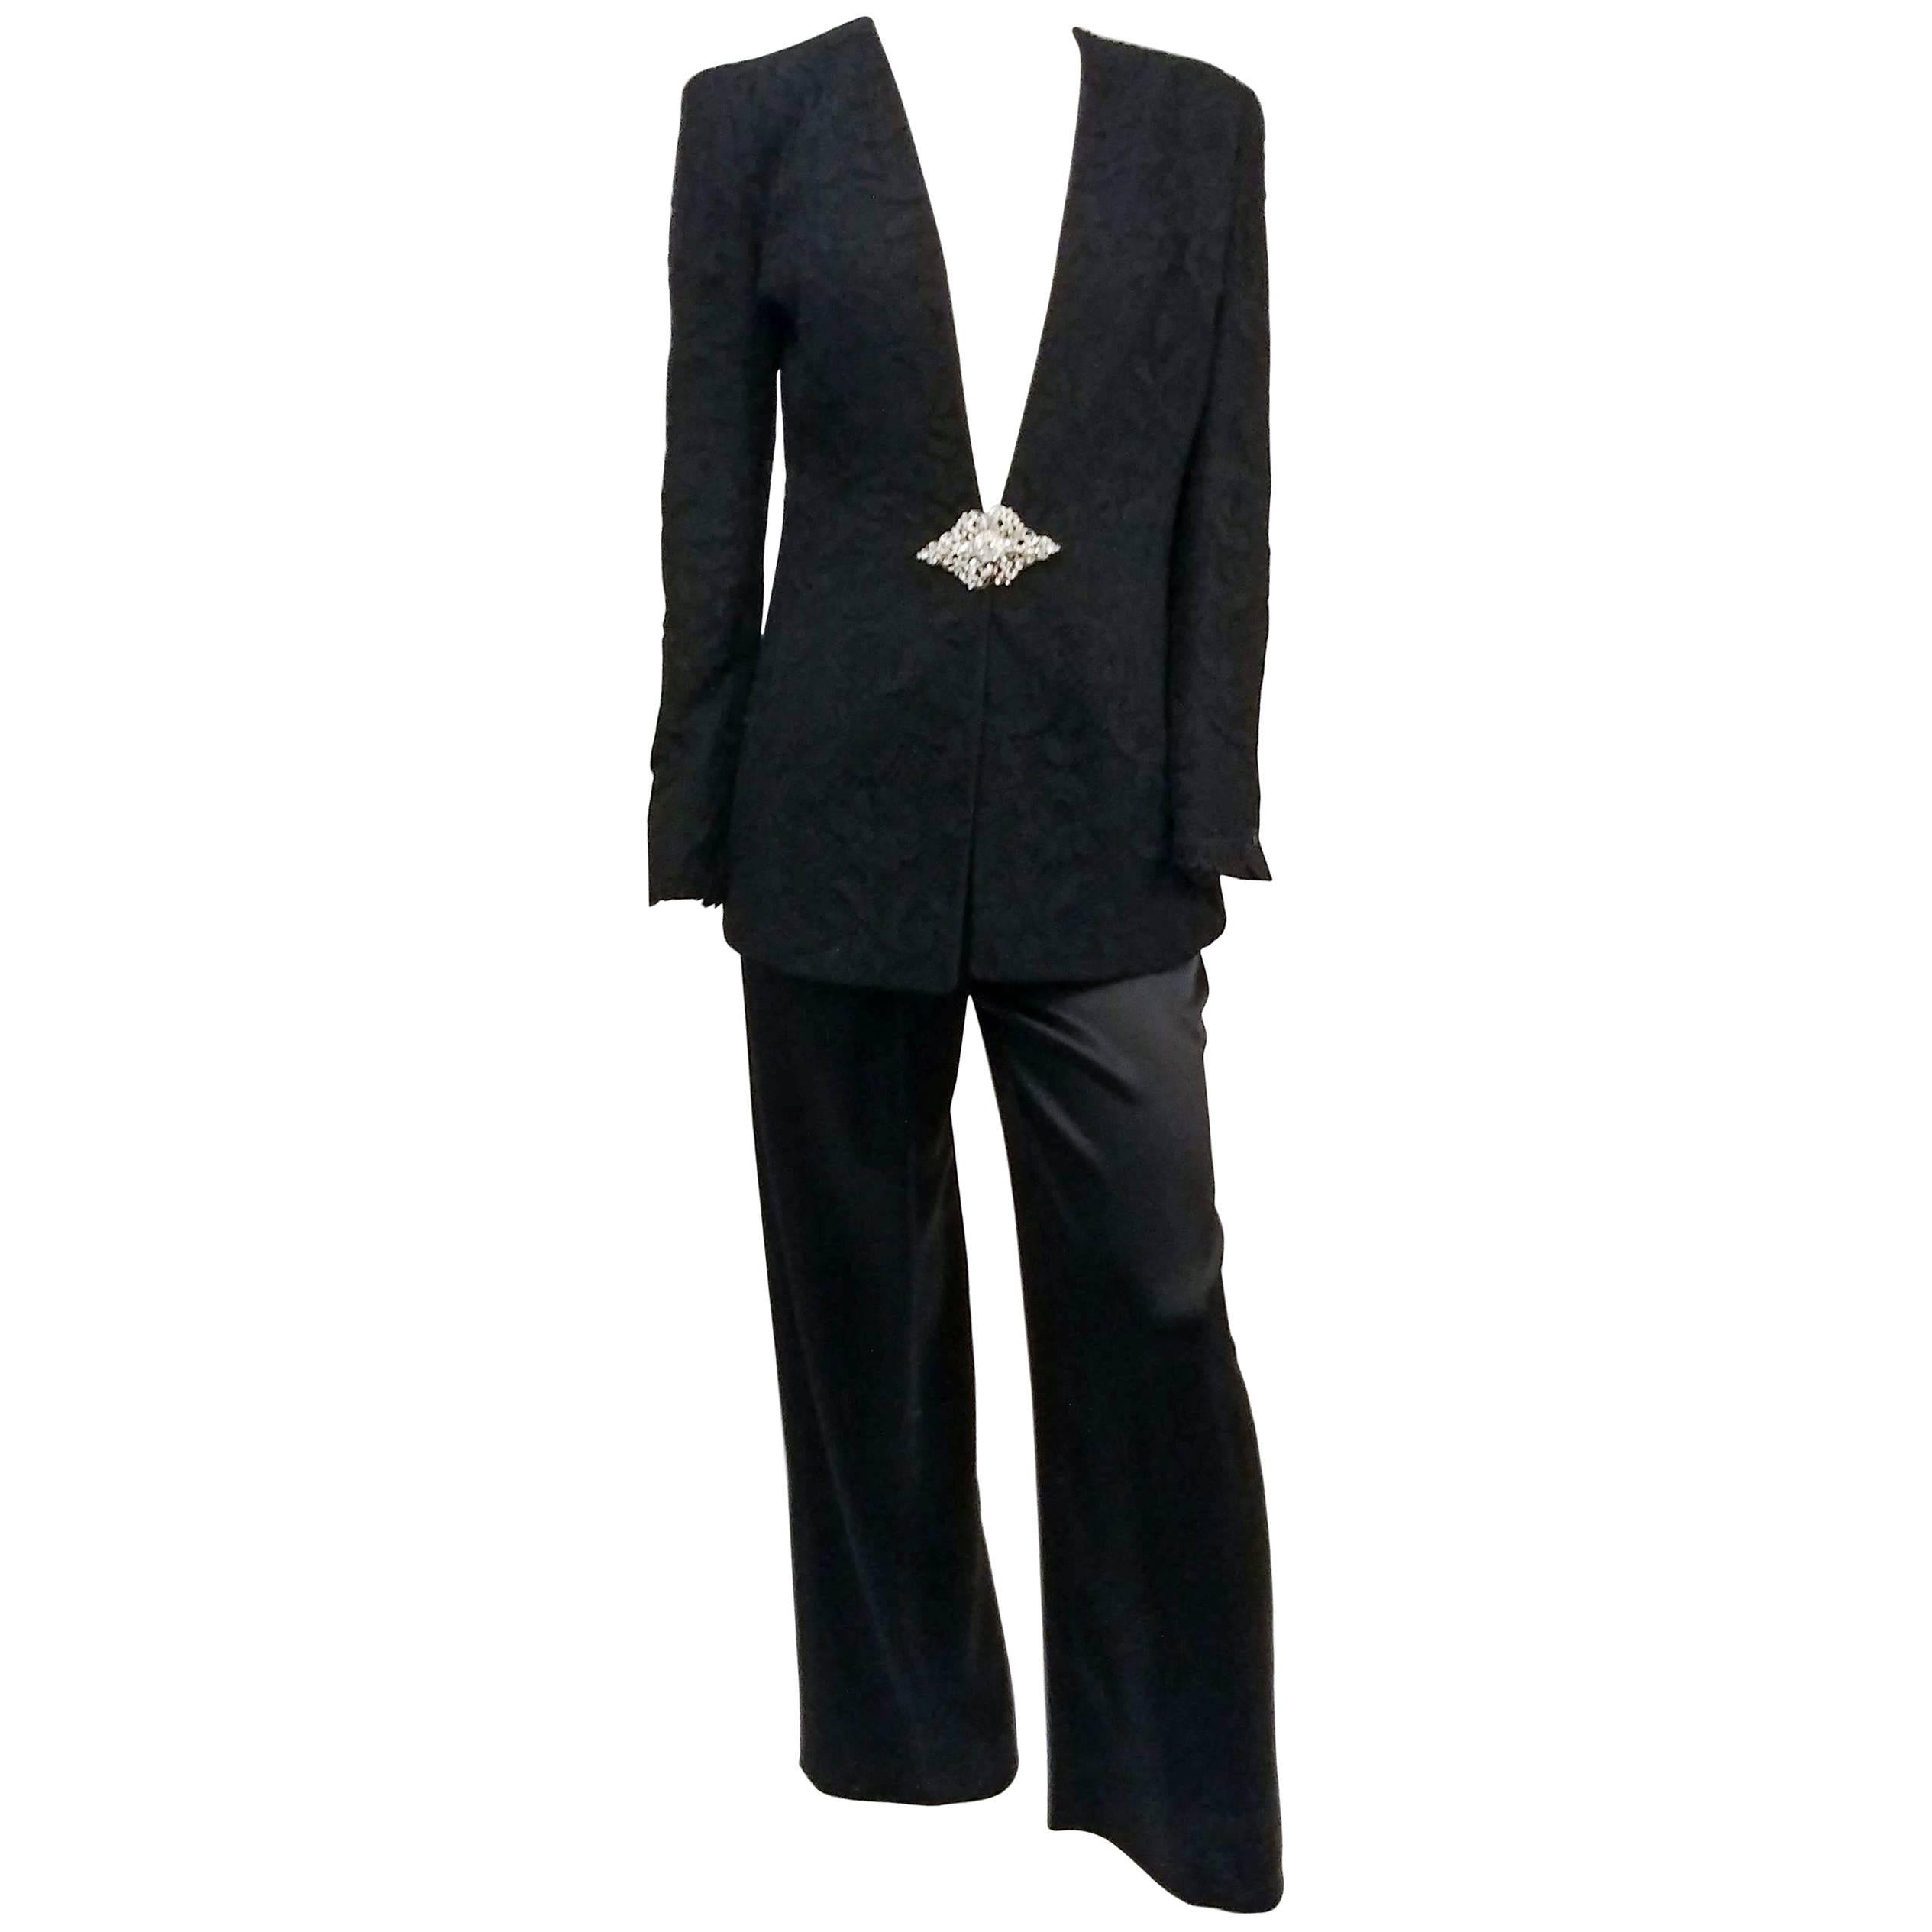 1980s Badgley Mischka Lace Blazer and Satin Trouser Pantsuit For Sale ...